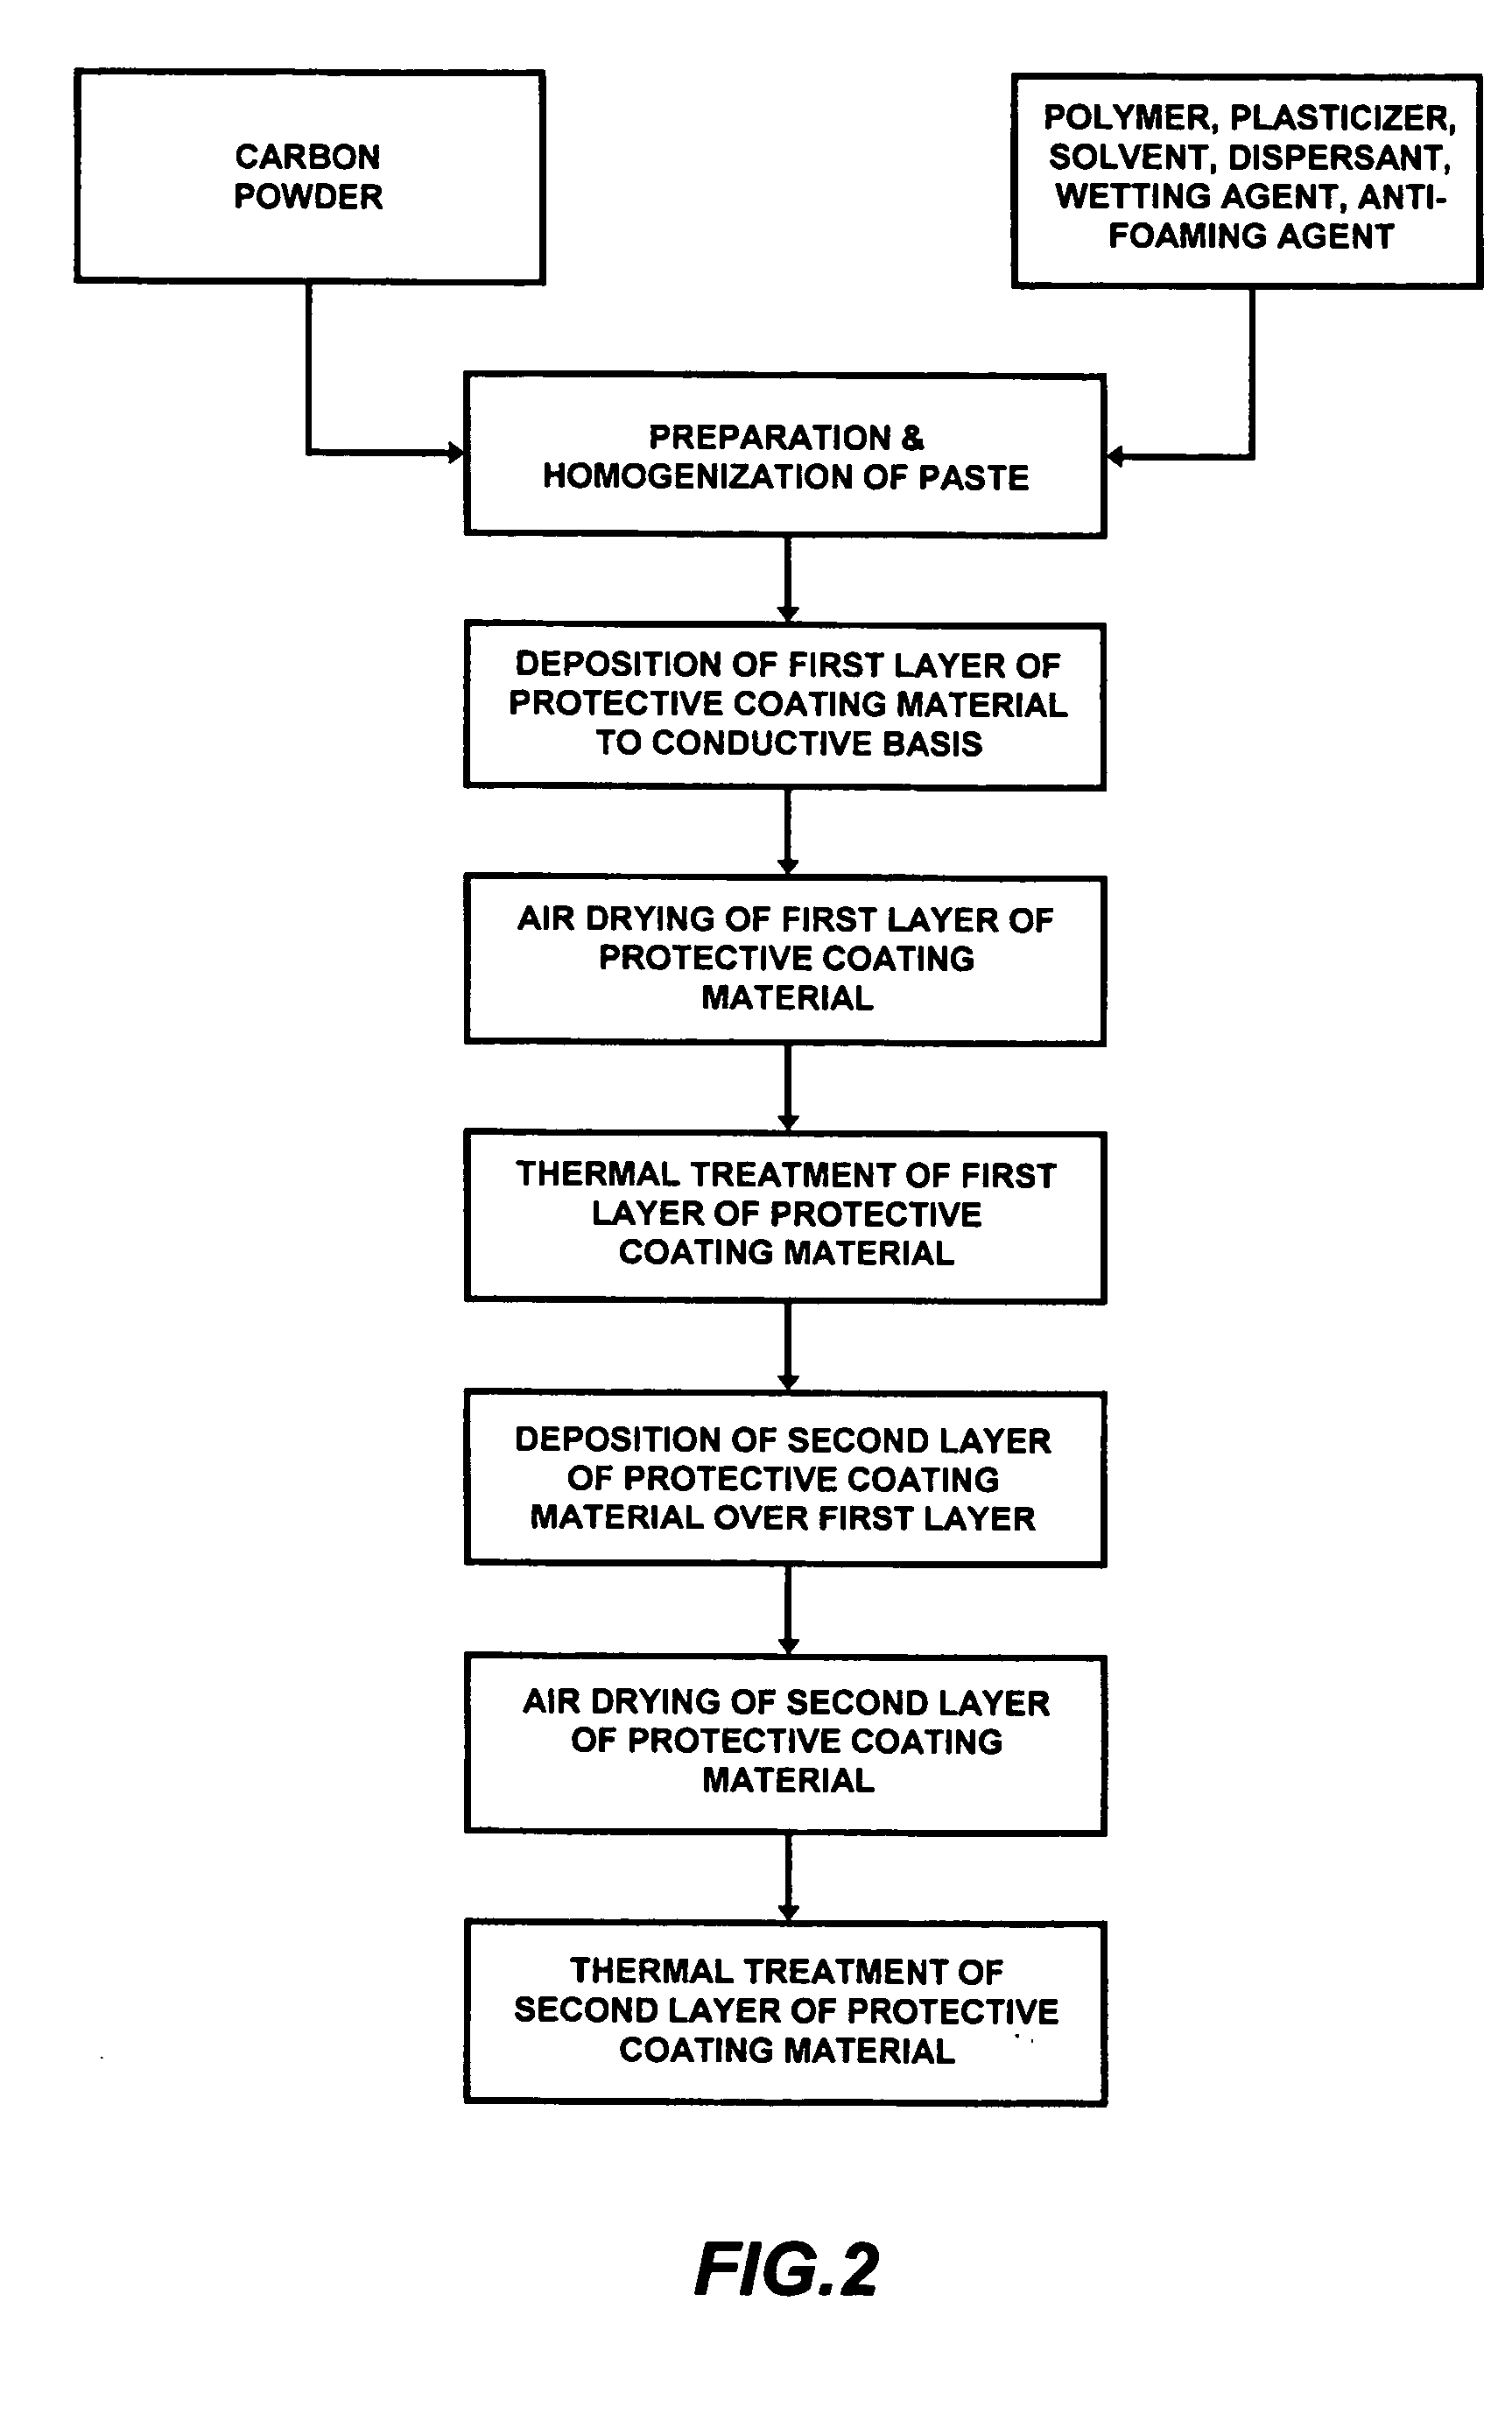 Current collector for double electric layer electrochemical capacitors and method of manufacture thereof